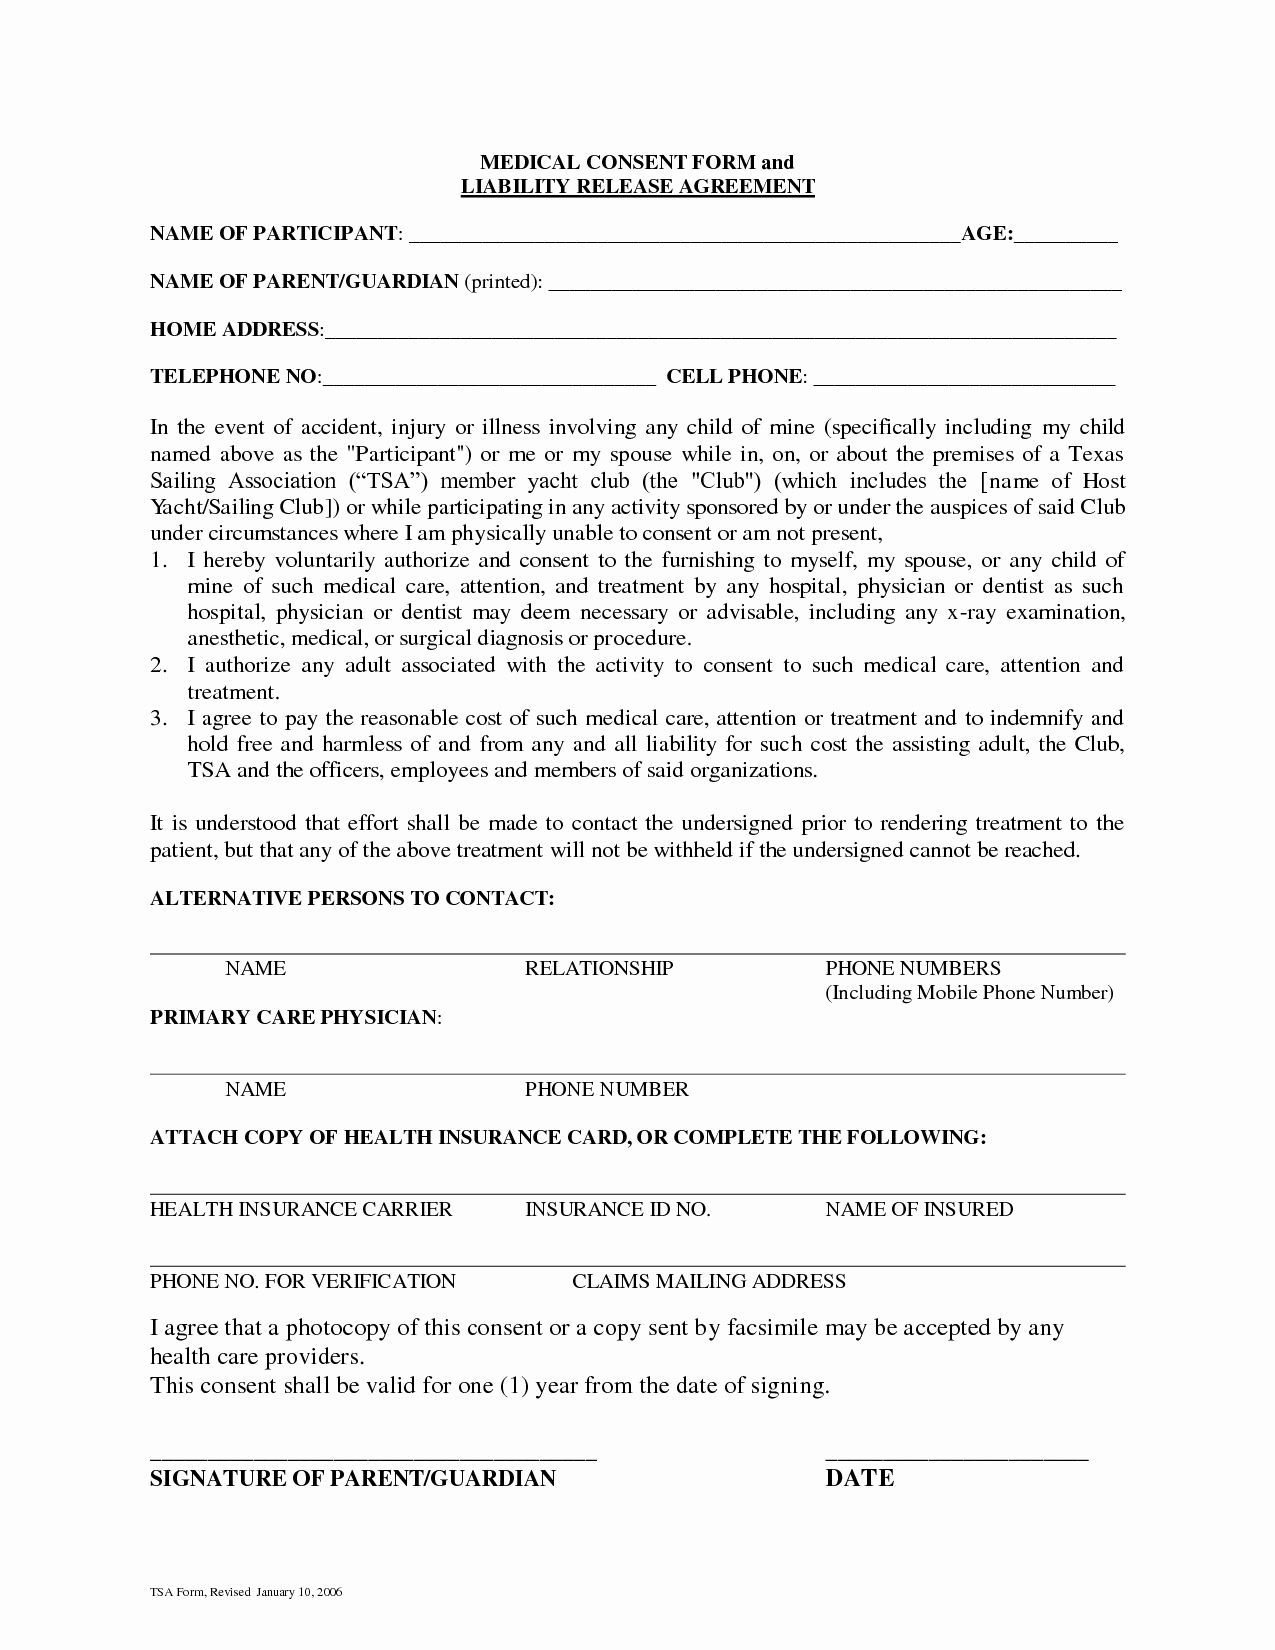 Free Printable Medical Release form Awesome Consent form to Release Medical Information Images